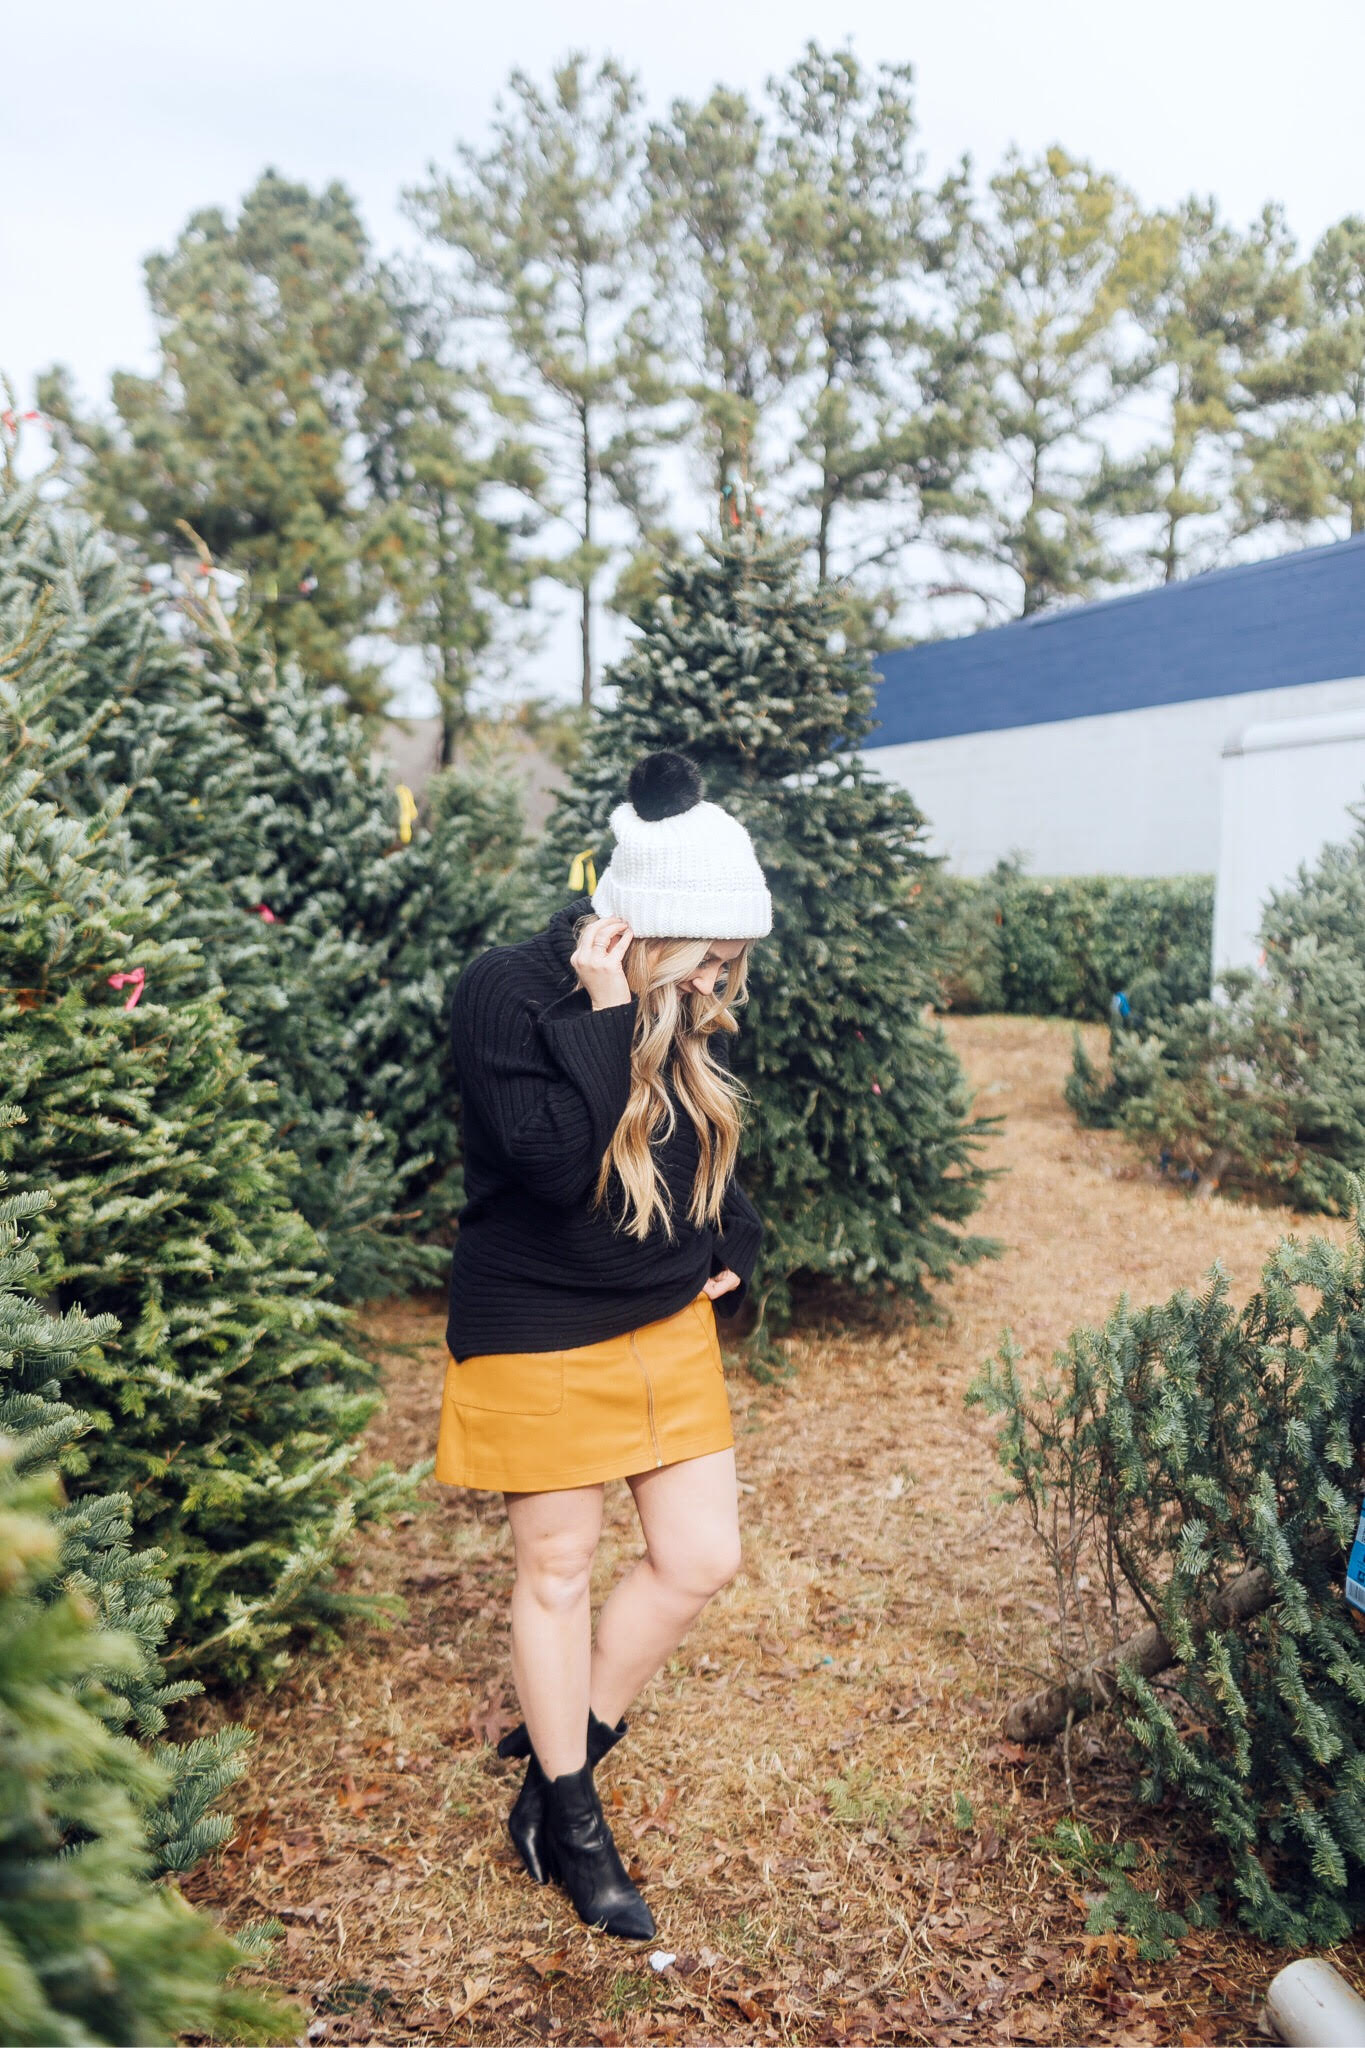 Winter accessories featured by top US fashion blog, Walking in Memphis in High Heels: image of a blonde woman walking in a Christmas tree farm wearing a Free People mini skirt, Melroseand Market sweater, Rebecca Minkoff pompom beanie, Sole Society Sock Bootie